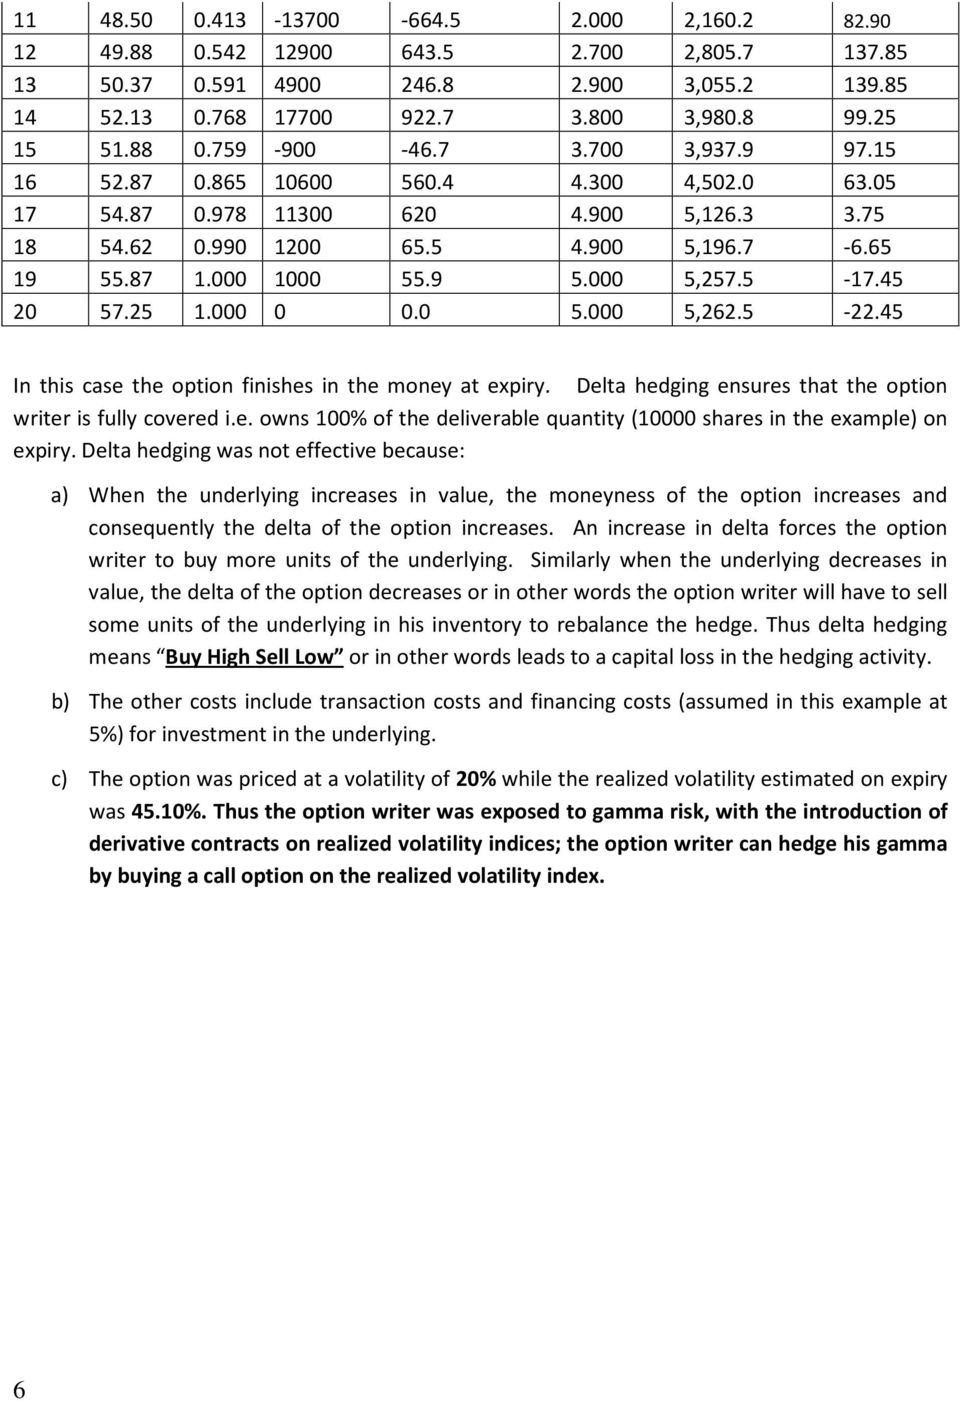 25 1.000 0 0.0 5.000 5,262.5 22.45 In this case the option finishes in the money at expiry. Delta hedging ensures that the option writer is fully covered i.e. owns 100% of the deliverable quantity (10000 shares in the example) on expiry.